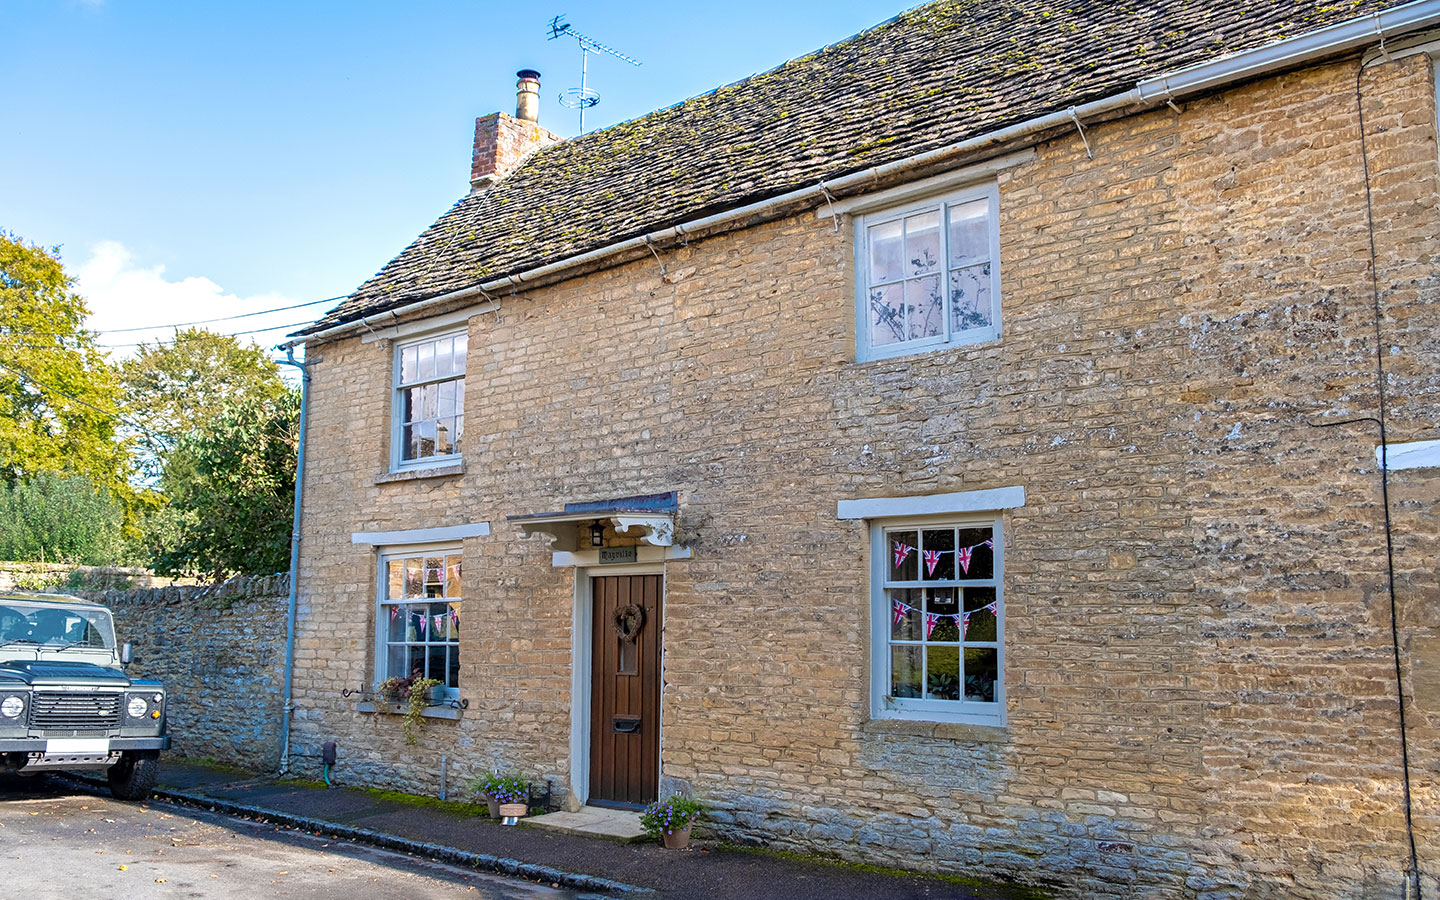 The house in Bampton which became The Grantham Arms